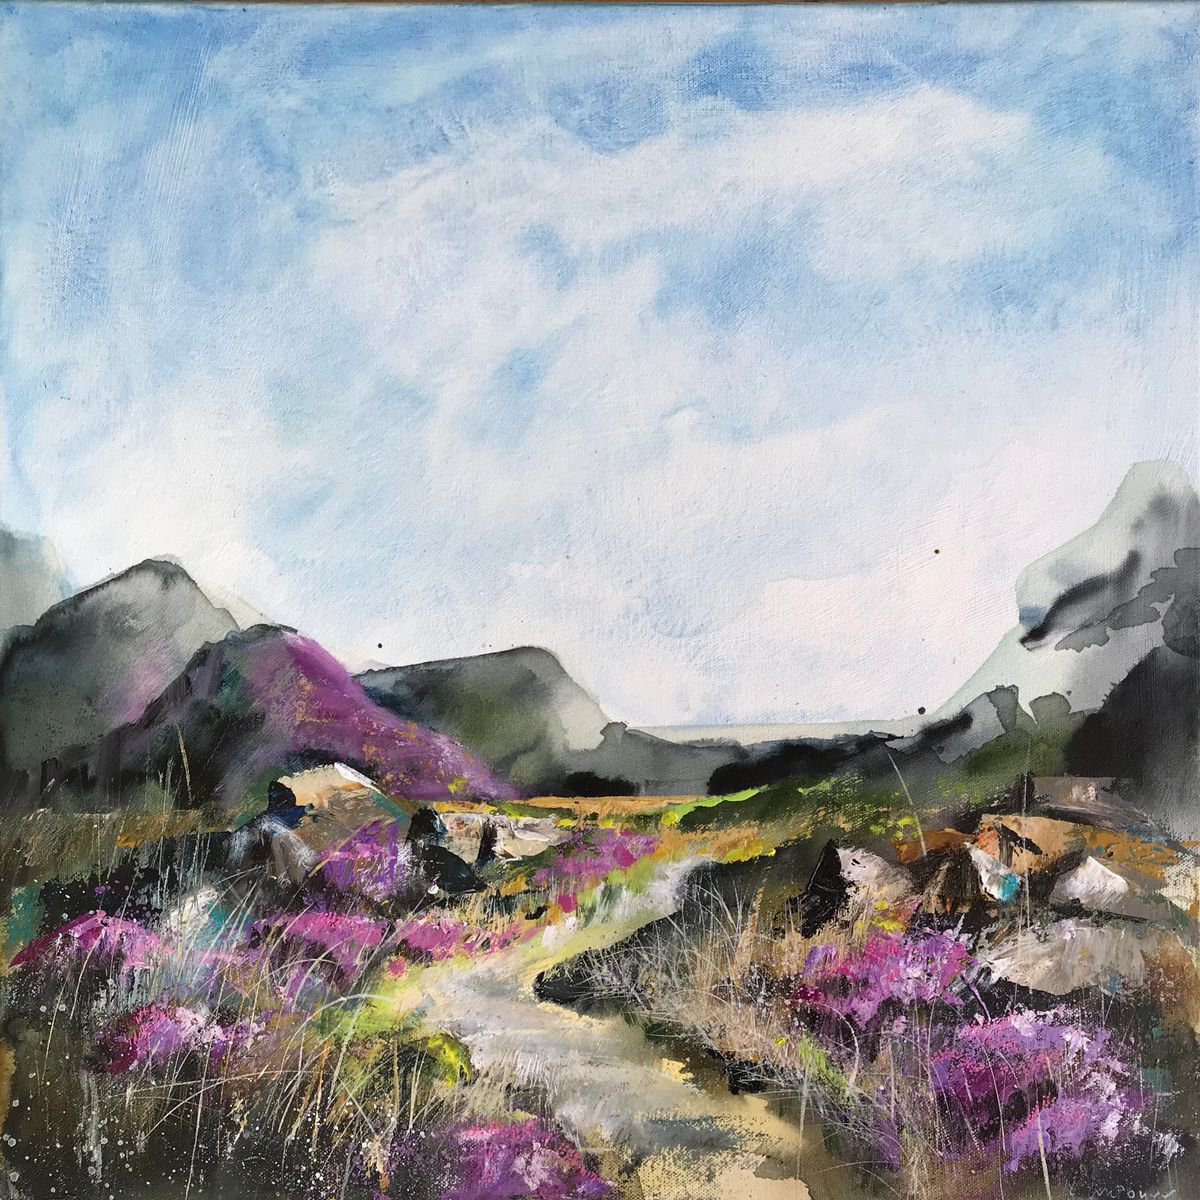 Heather Moors #02 - a Moorland landscape, 50 x 50cm by Luci Power